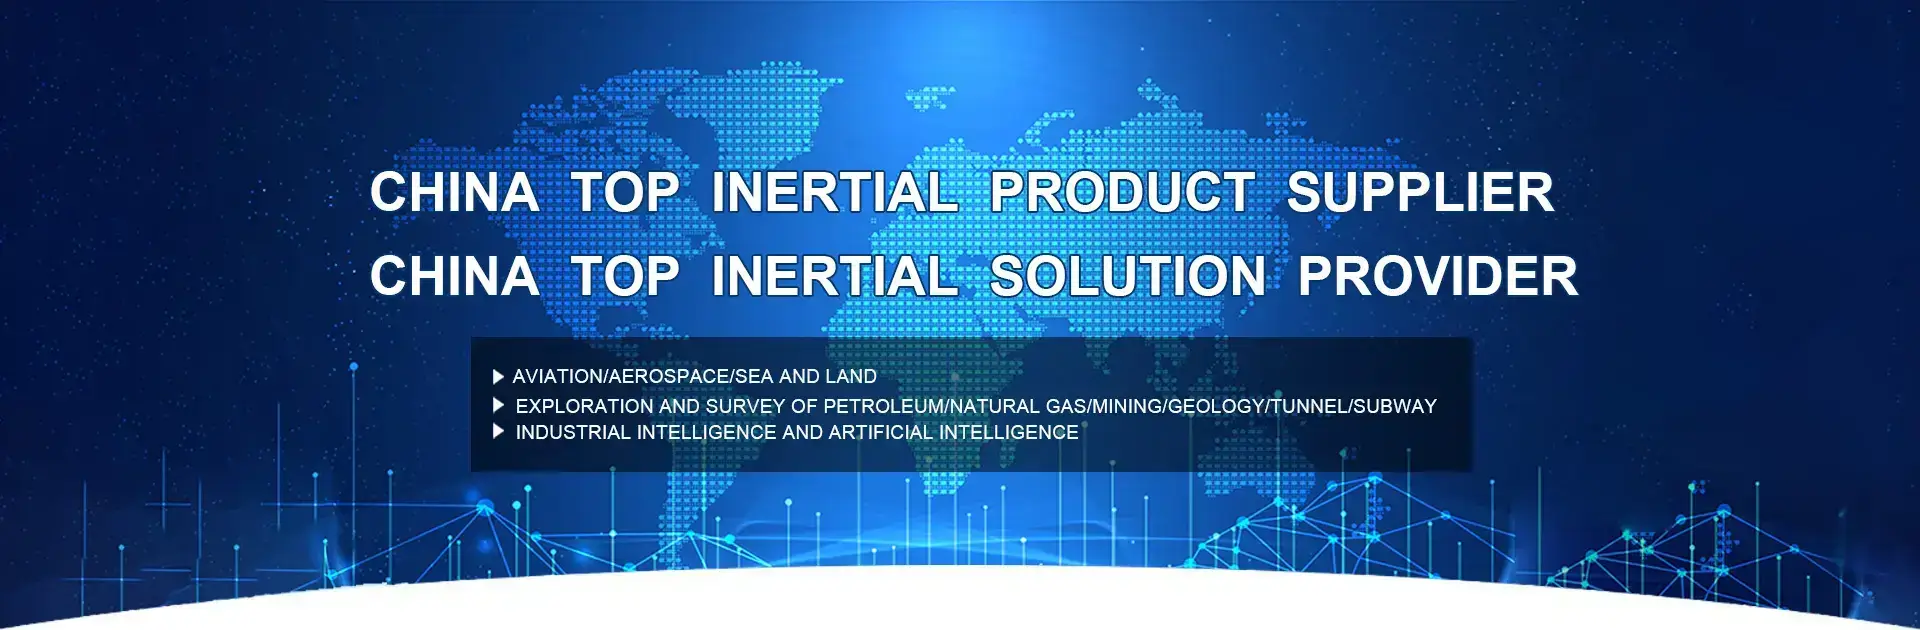 ERICCO-CHINA-TOP-INERTIAL-PRODUCT-SUPPLIER-Banner001